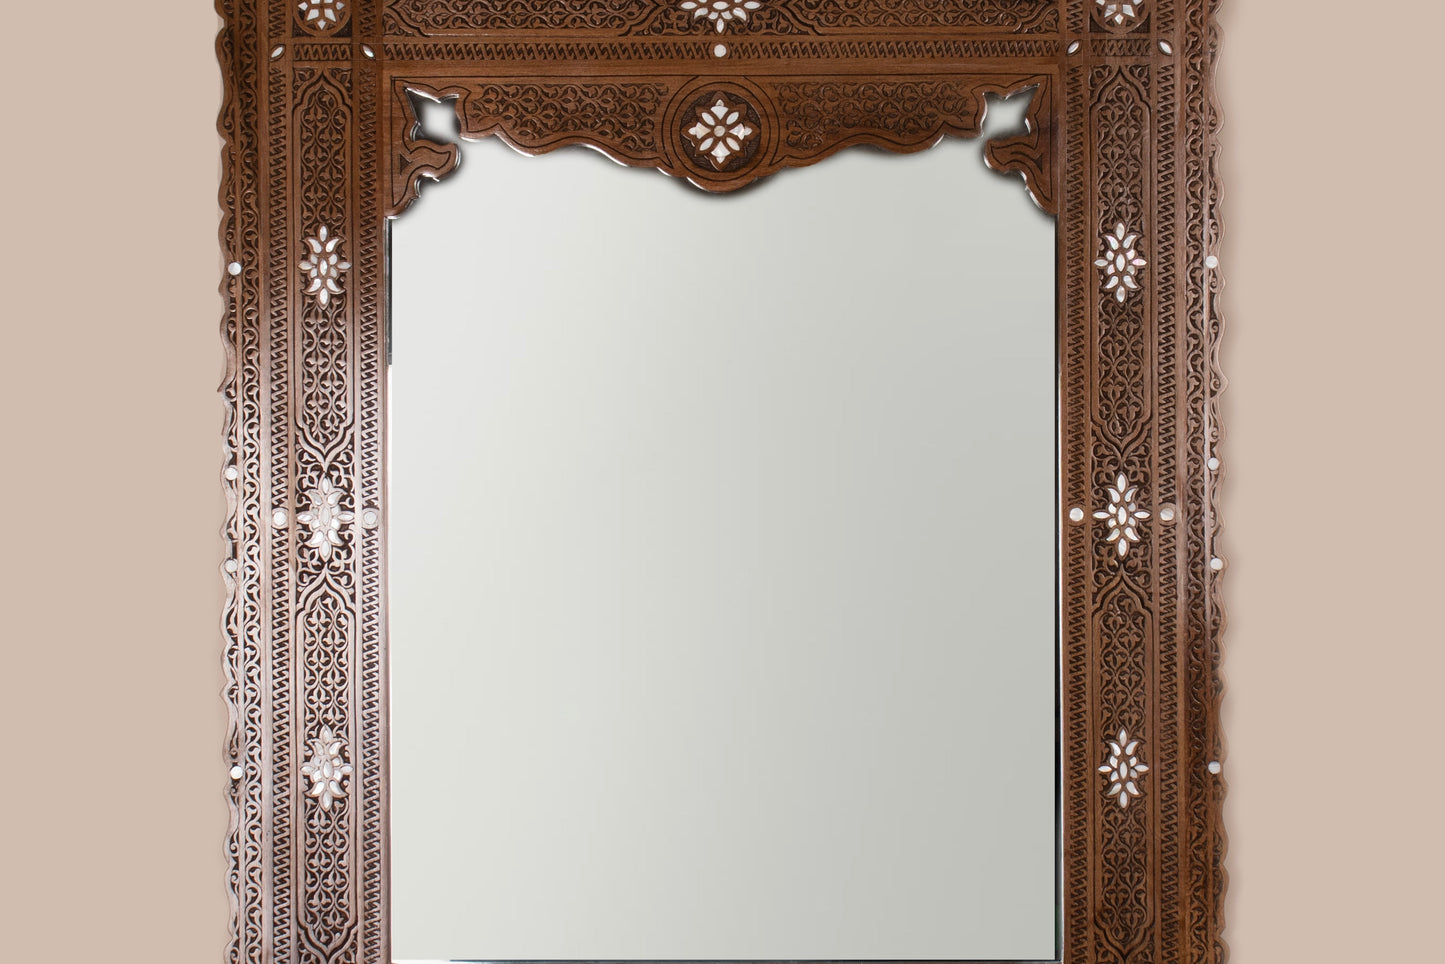 Mirror - Inlayed with Mother of Pearl